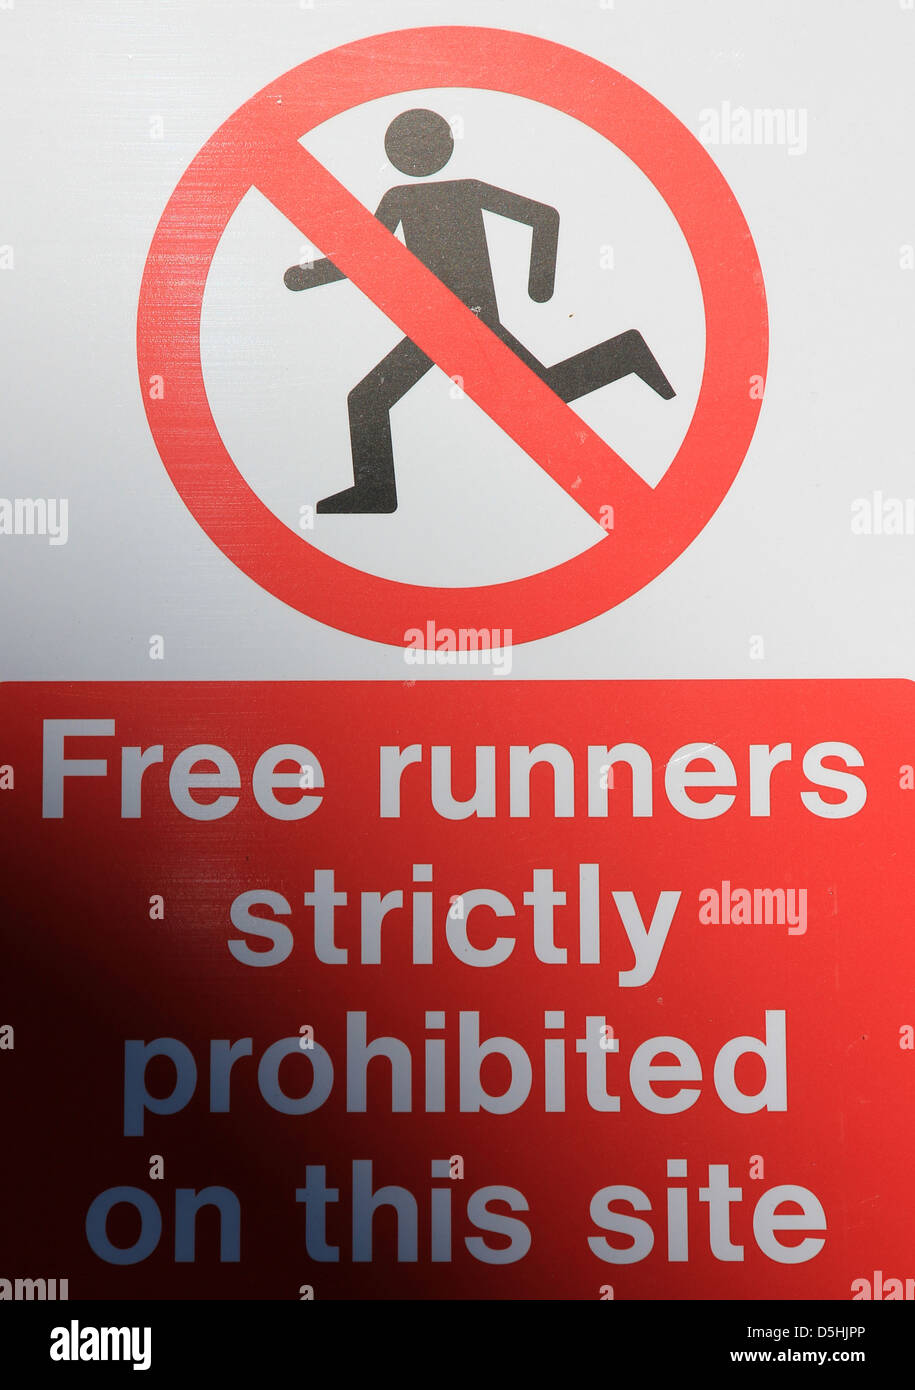 free runners strictly prohibited on this site sign Stock Photo